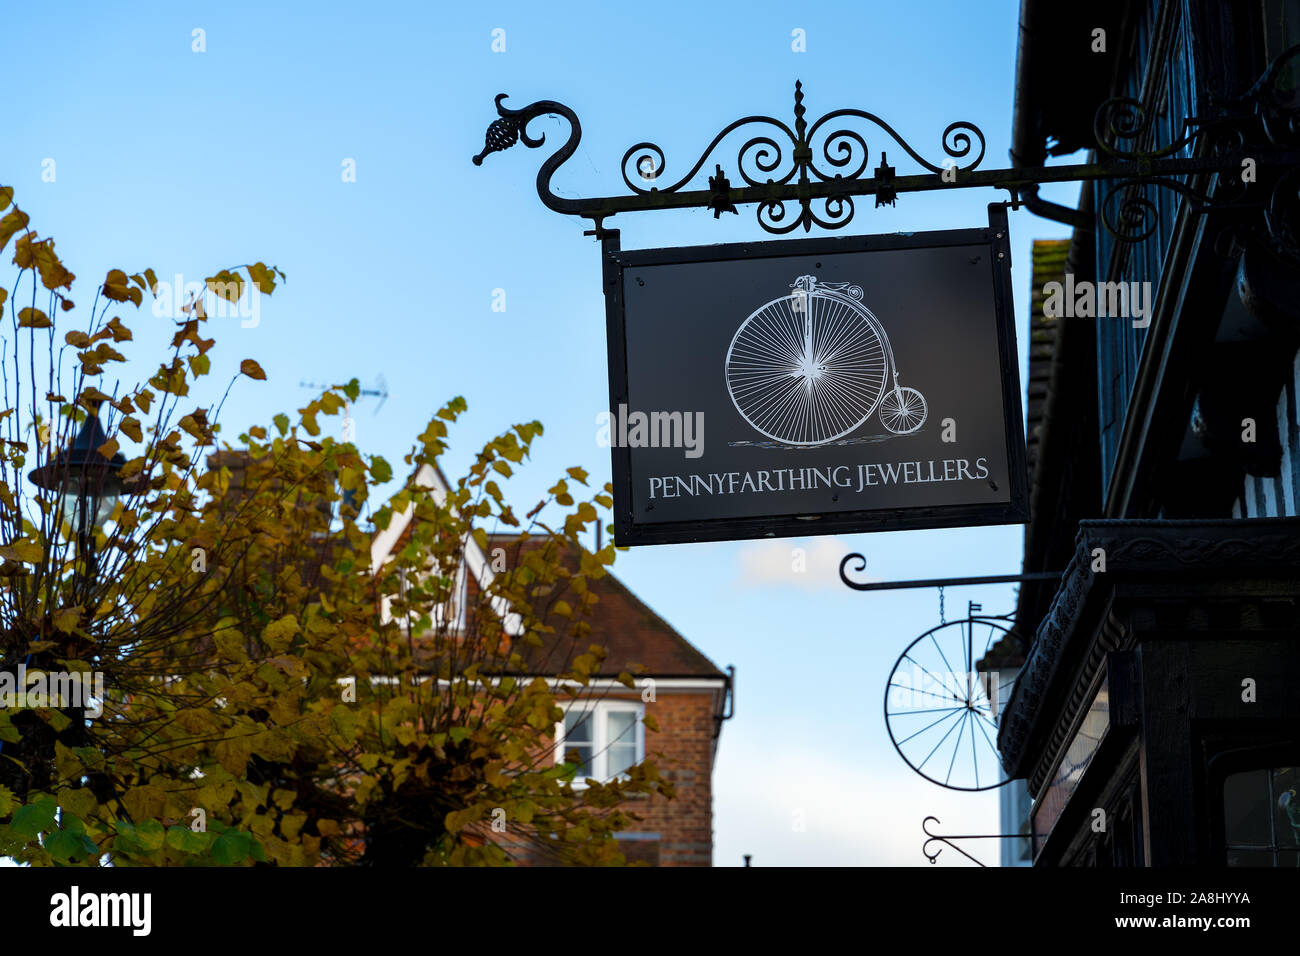 EAST GRINSTEAD, WEST SUSSEX/UK - NOVEMBER 7 : Hanging sign for Penny Farthing jewellers in East Grinstead West Sussex on November 7, 2019 Stock Photo